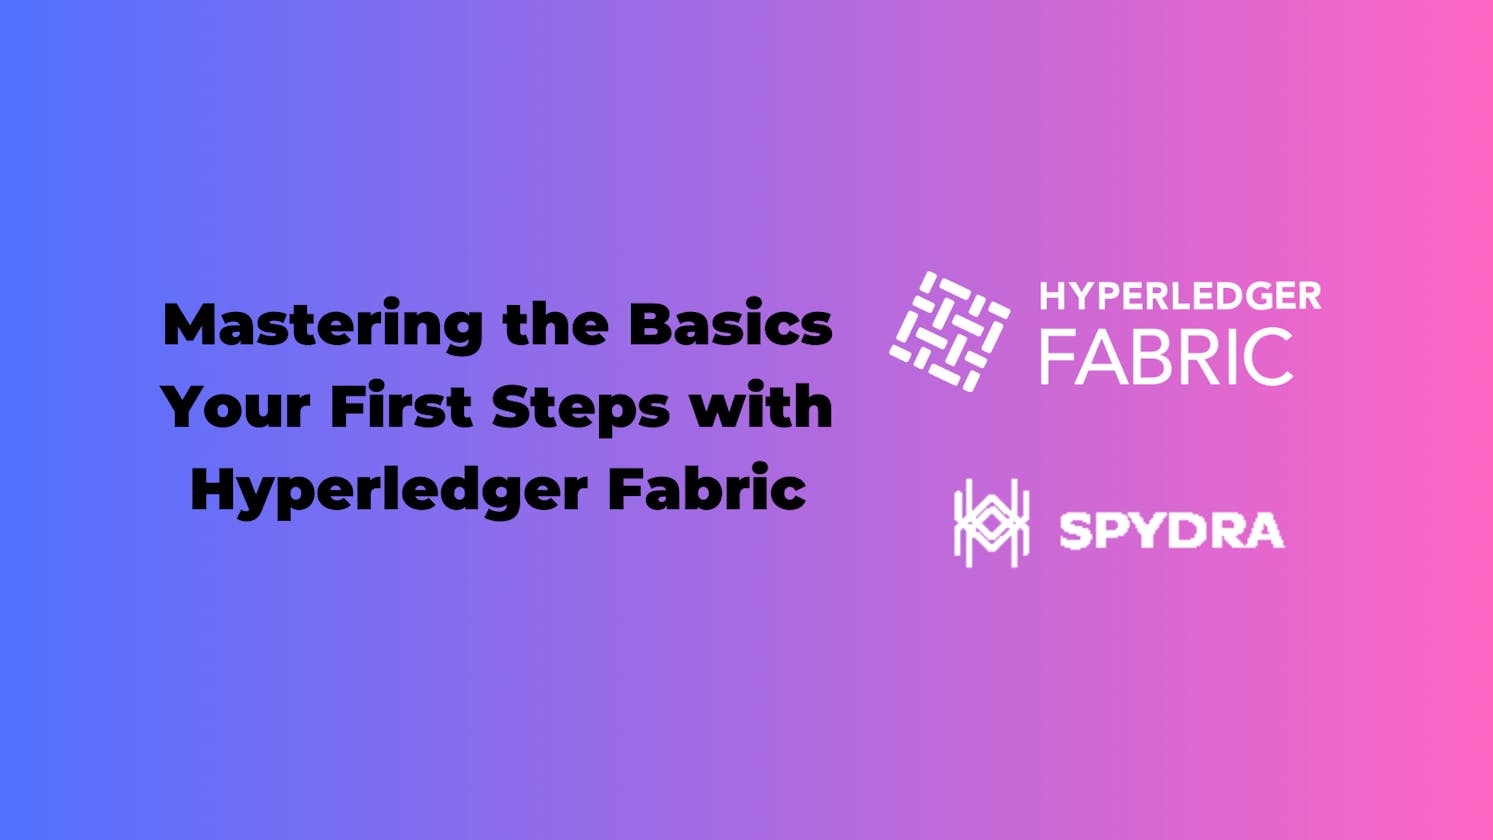 Mastering the Basics: Your First Steps with Hyperledger Fabric